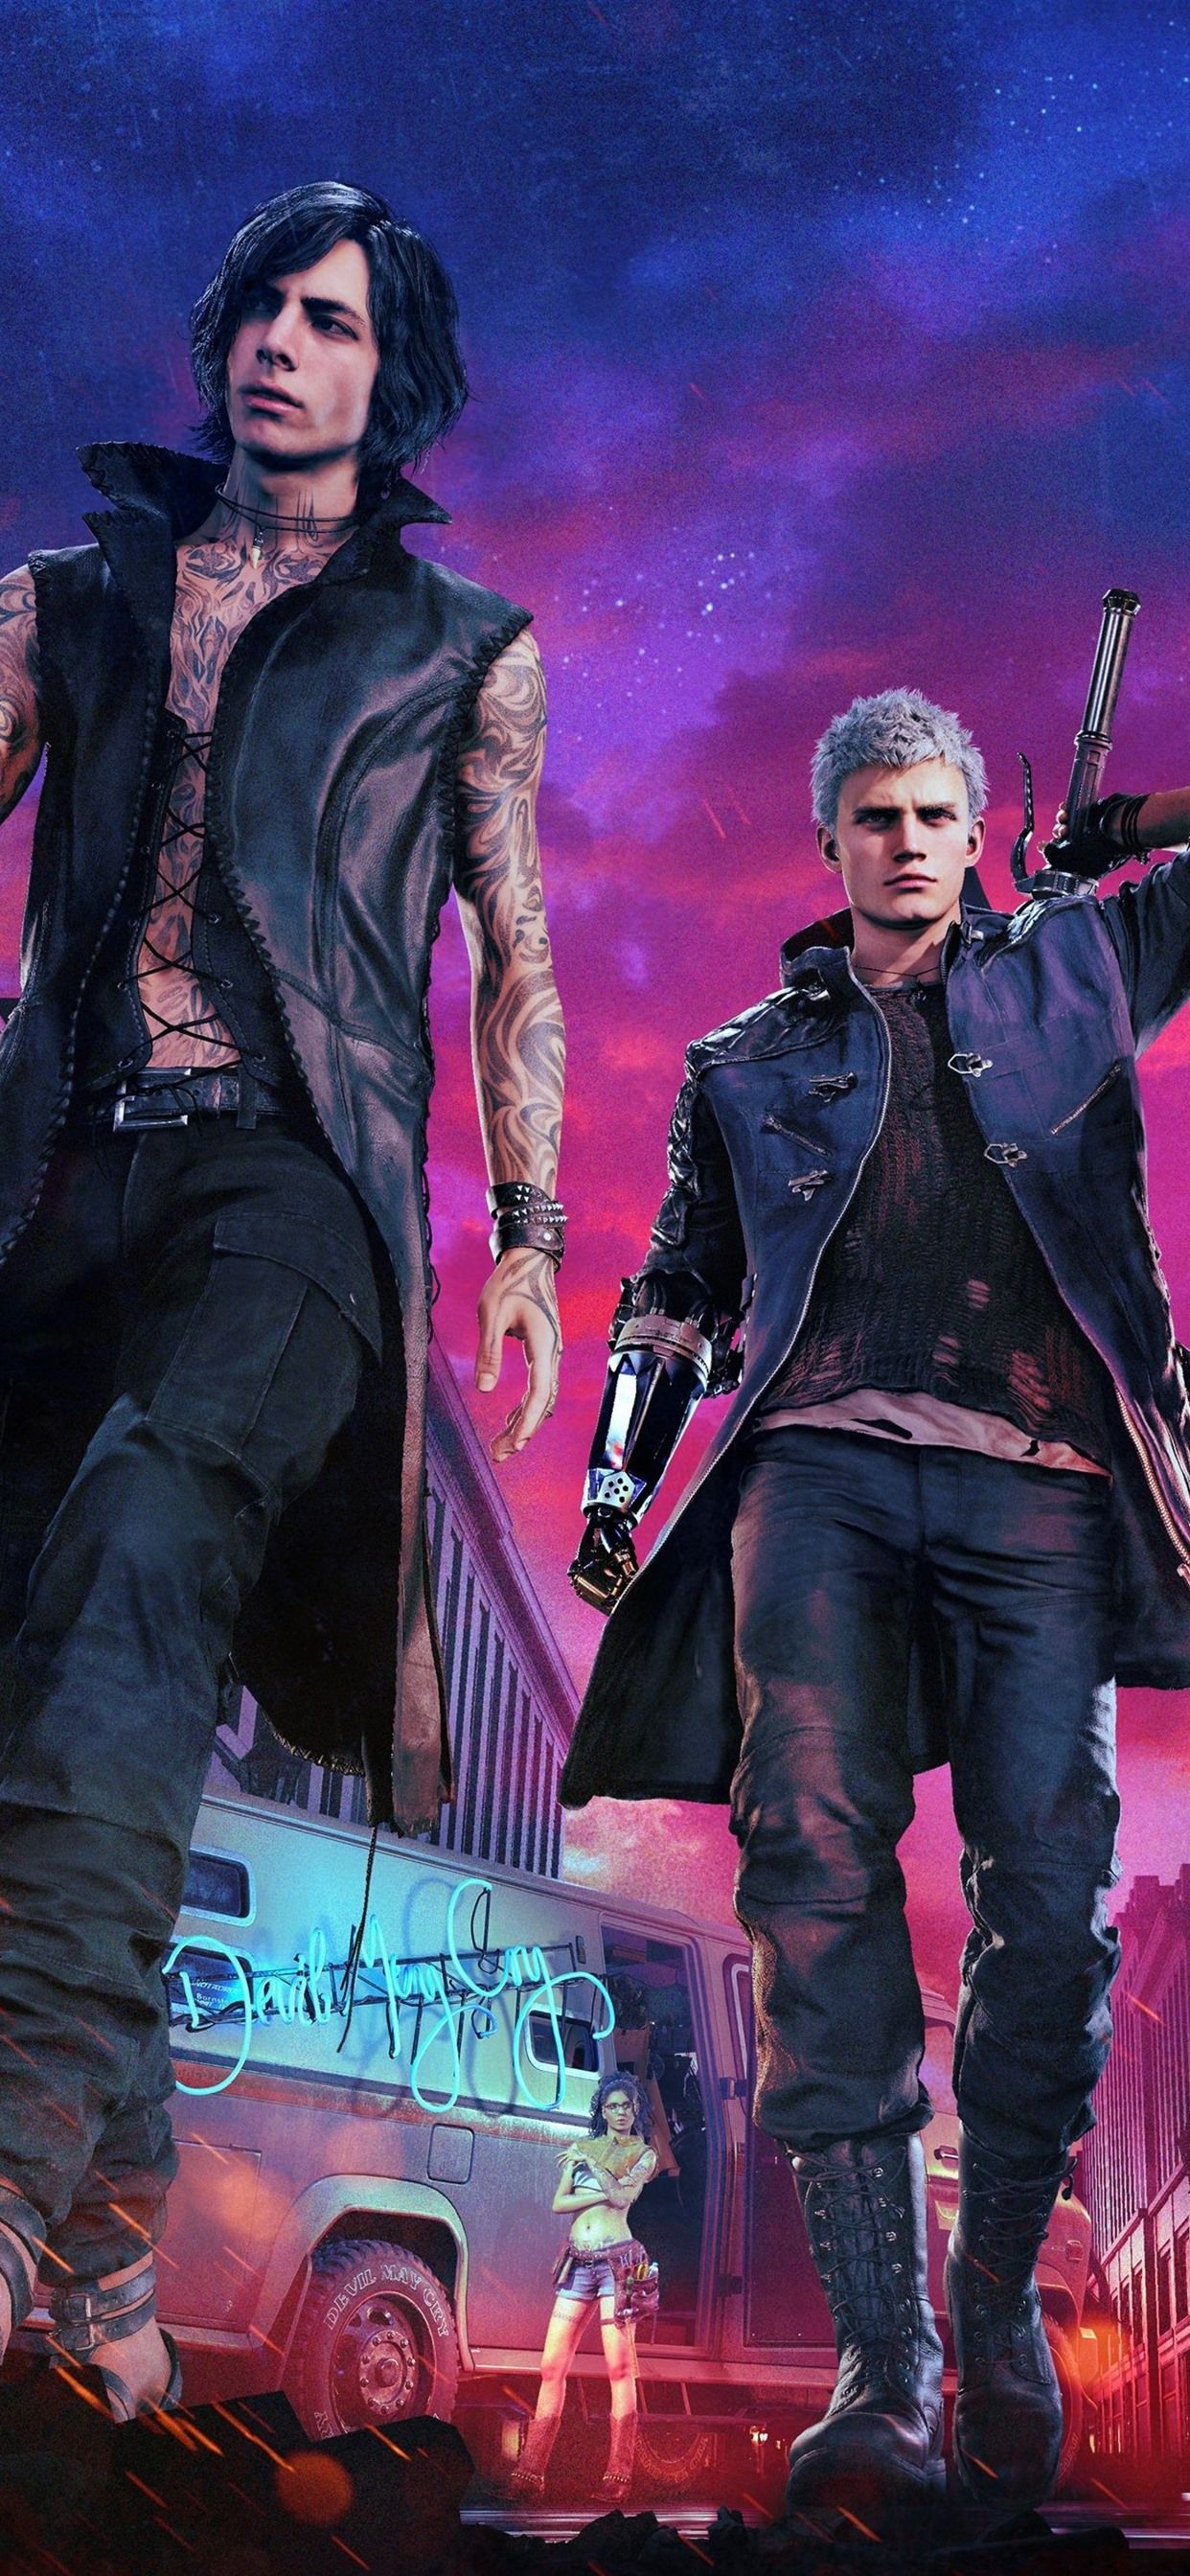 Devil May Cry PS4 Game 1242x2688 IPhone 11 Pro XS Max Wallpaper